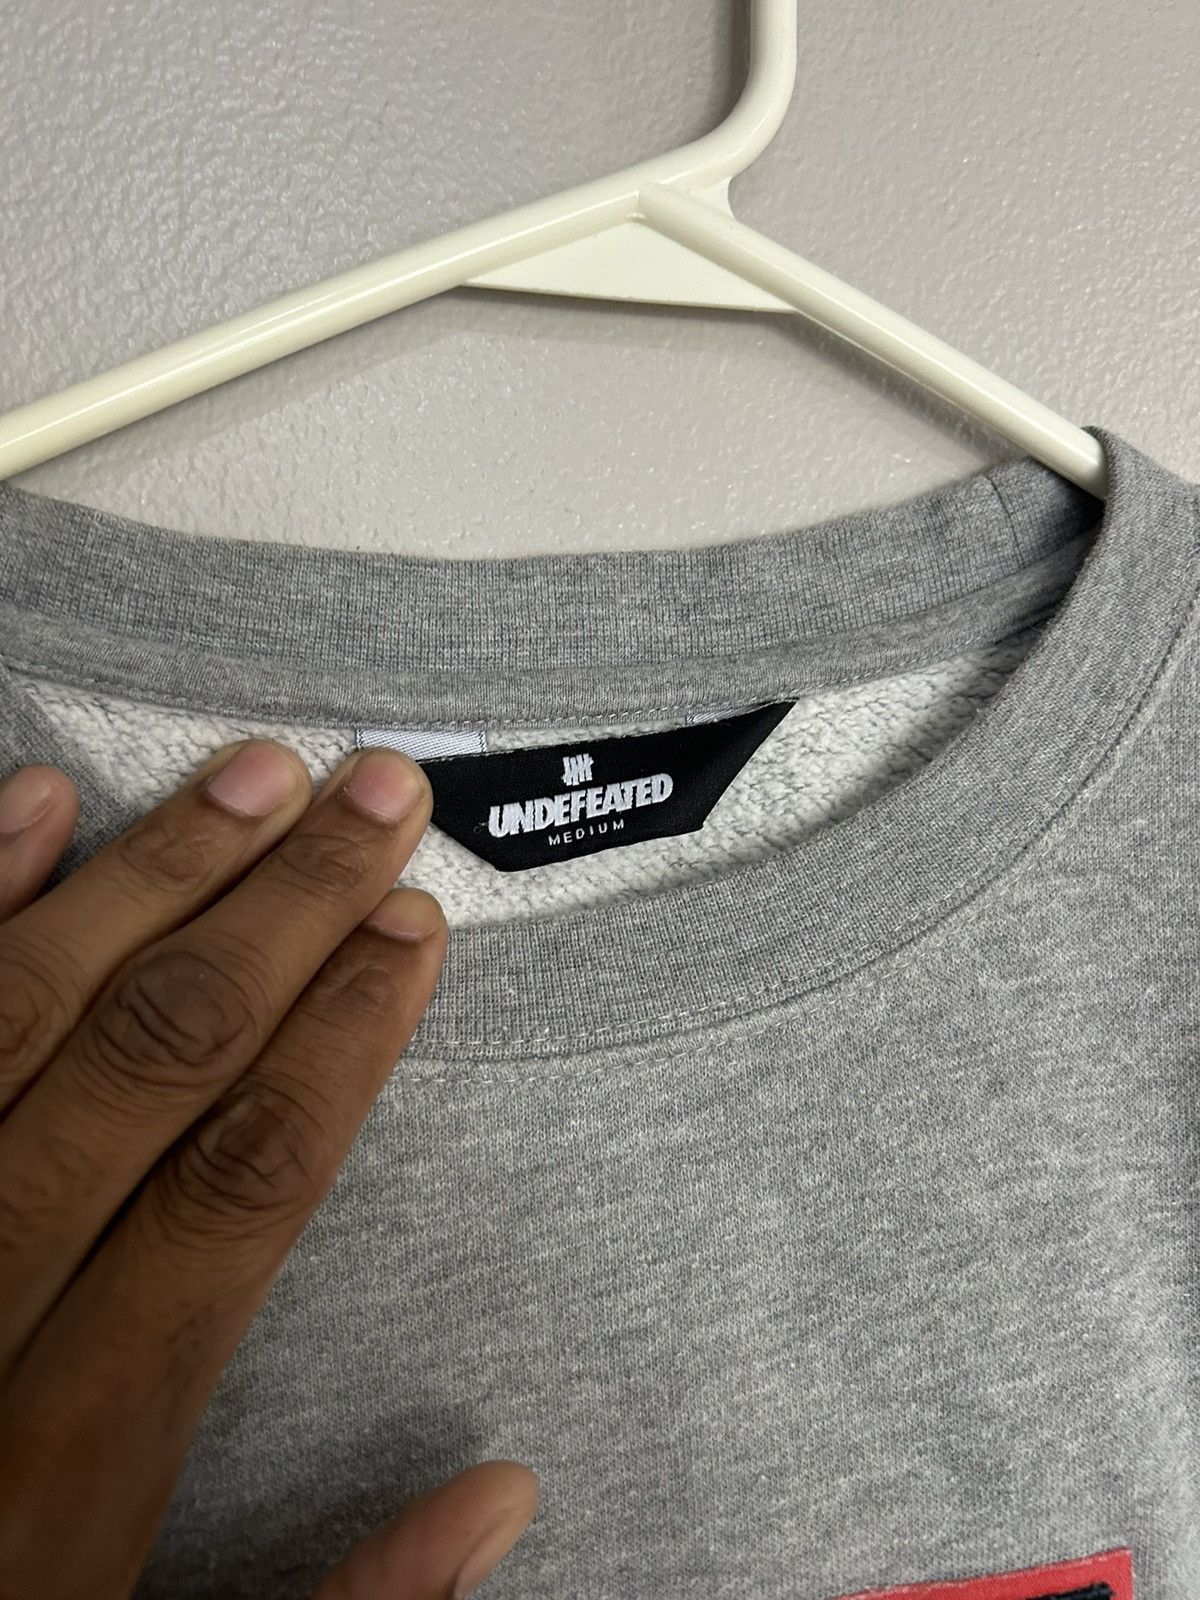 Undefeated Undefeated crewneck m Size US M / EU 48-50 / 2 - 2 Preview